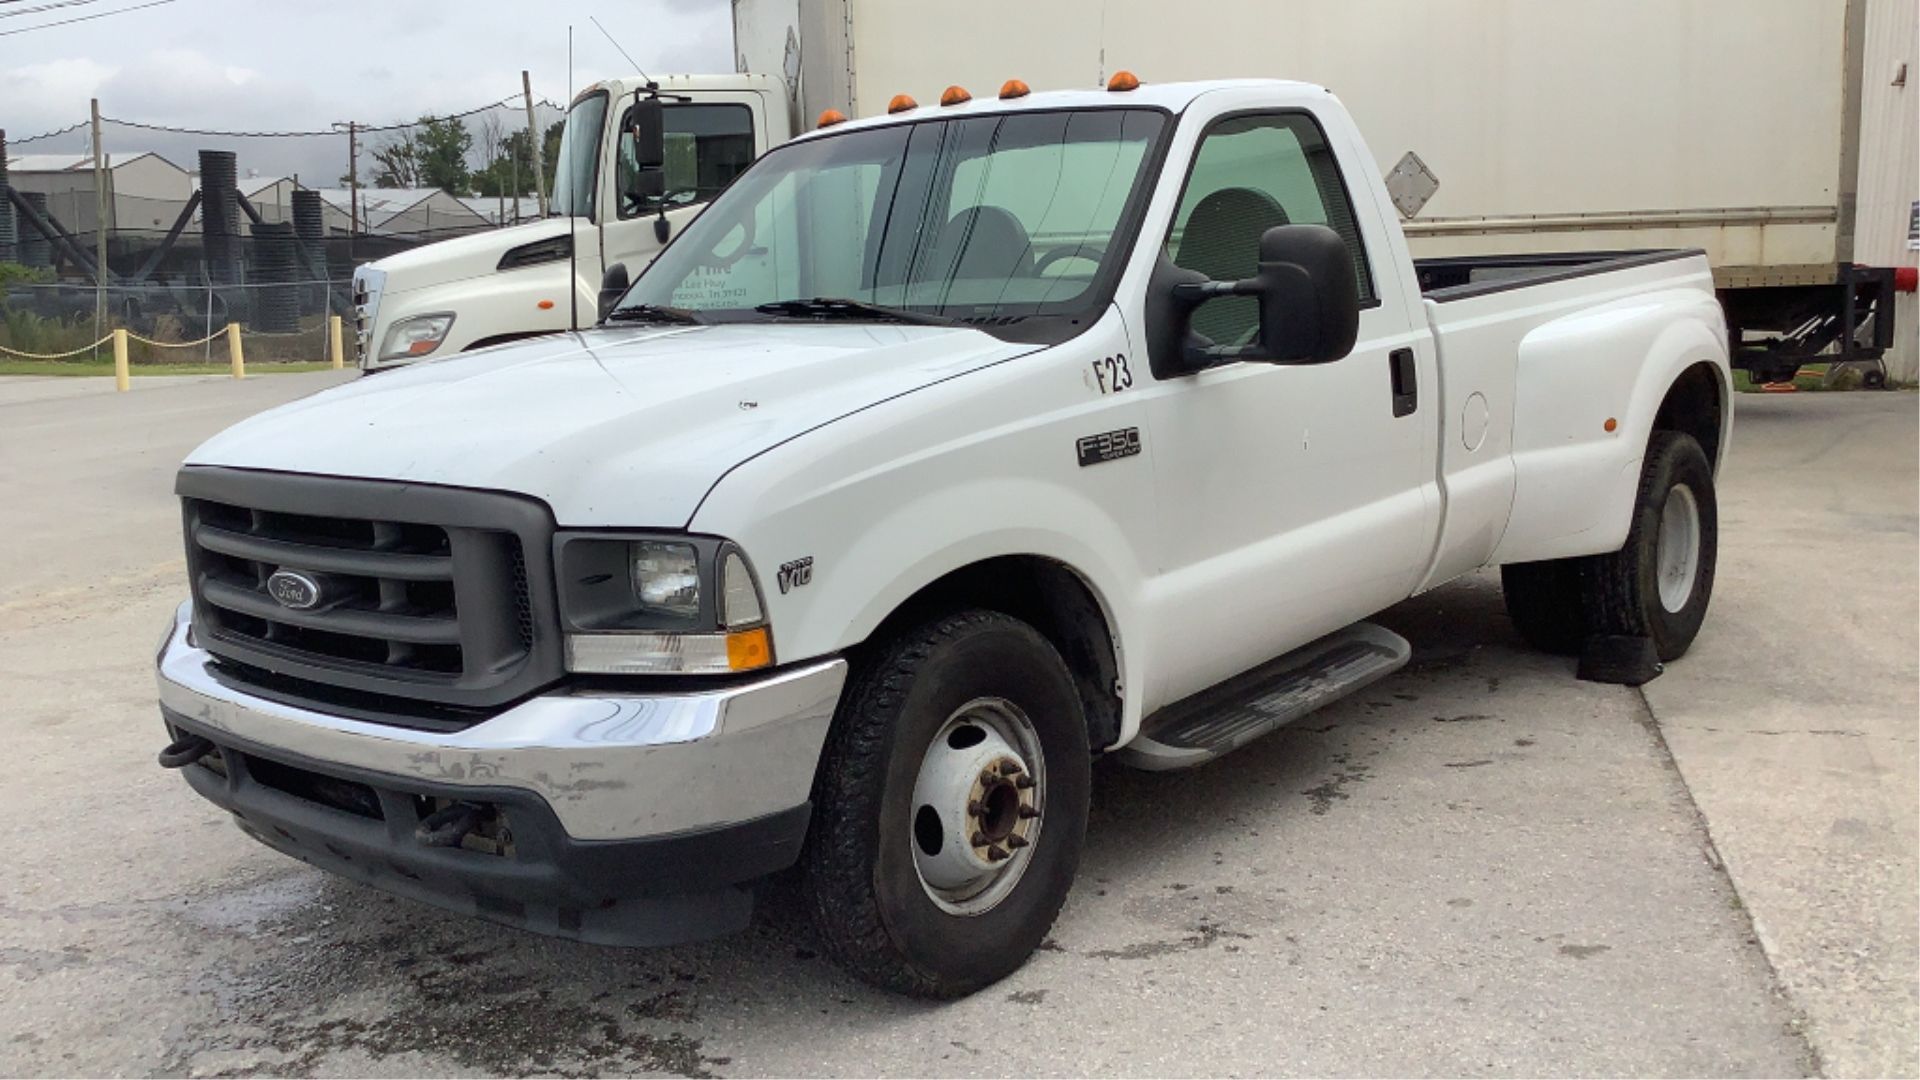 2002 Ford F-350 Regular Cab Dually 2WD - Image 10 of 89